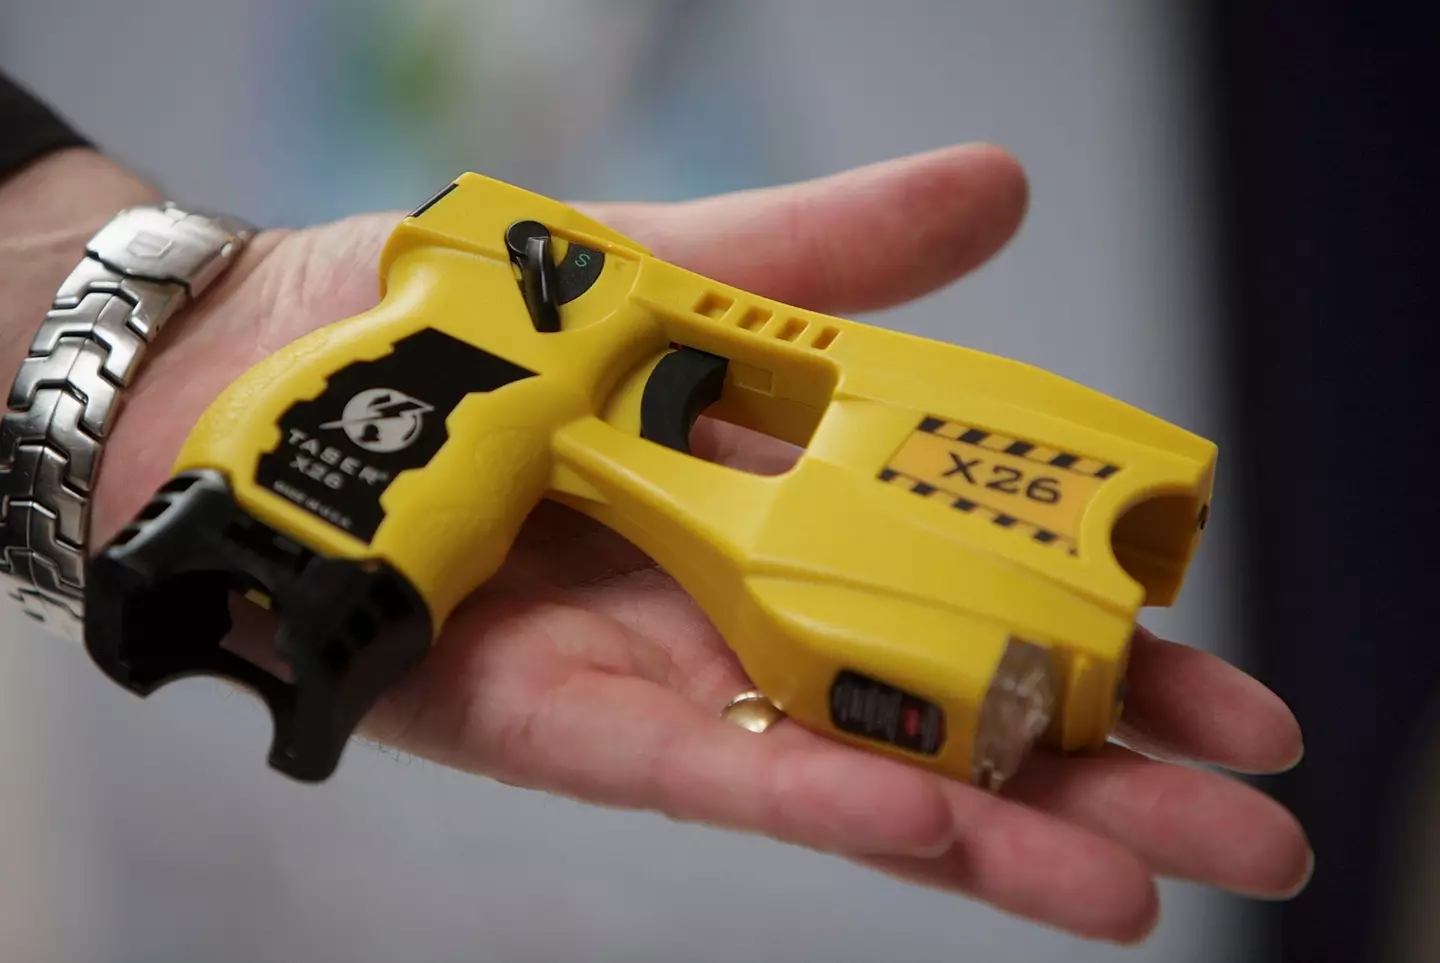 The 37-year-old attacked his girlfriend of seven years with a taser.